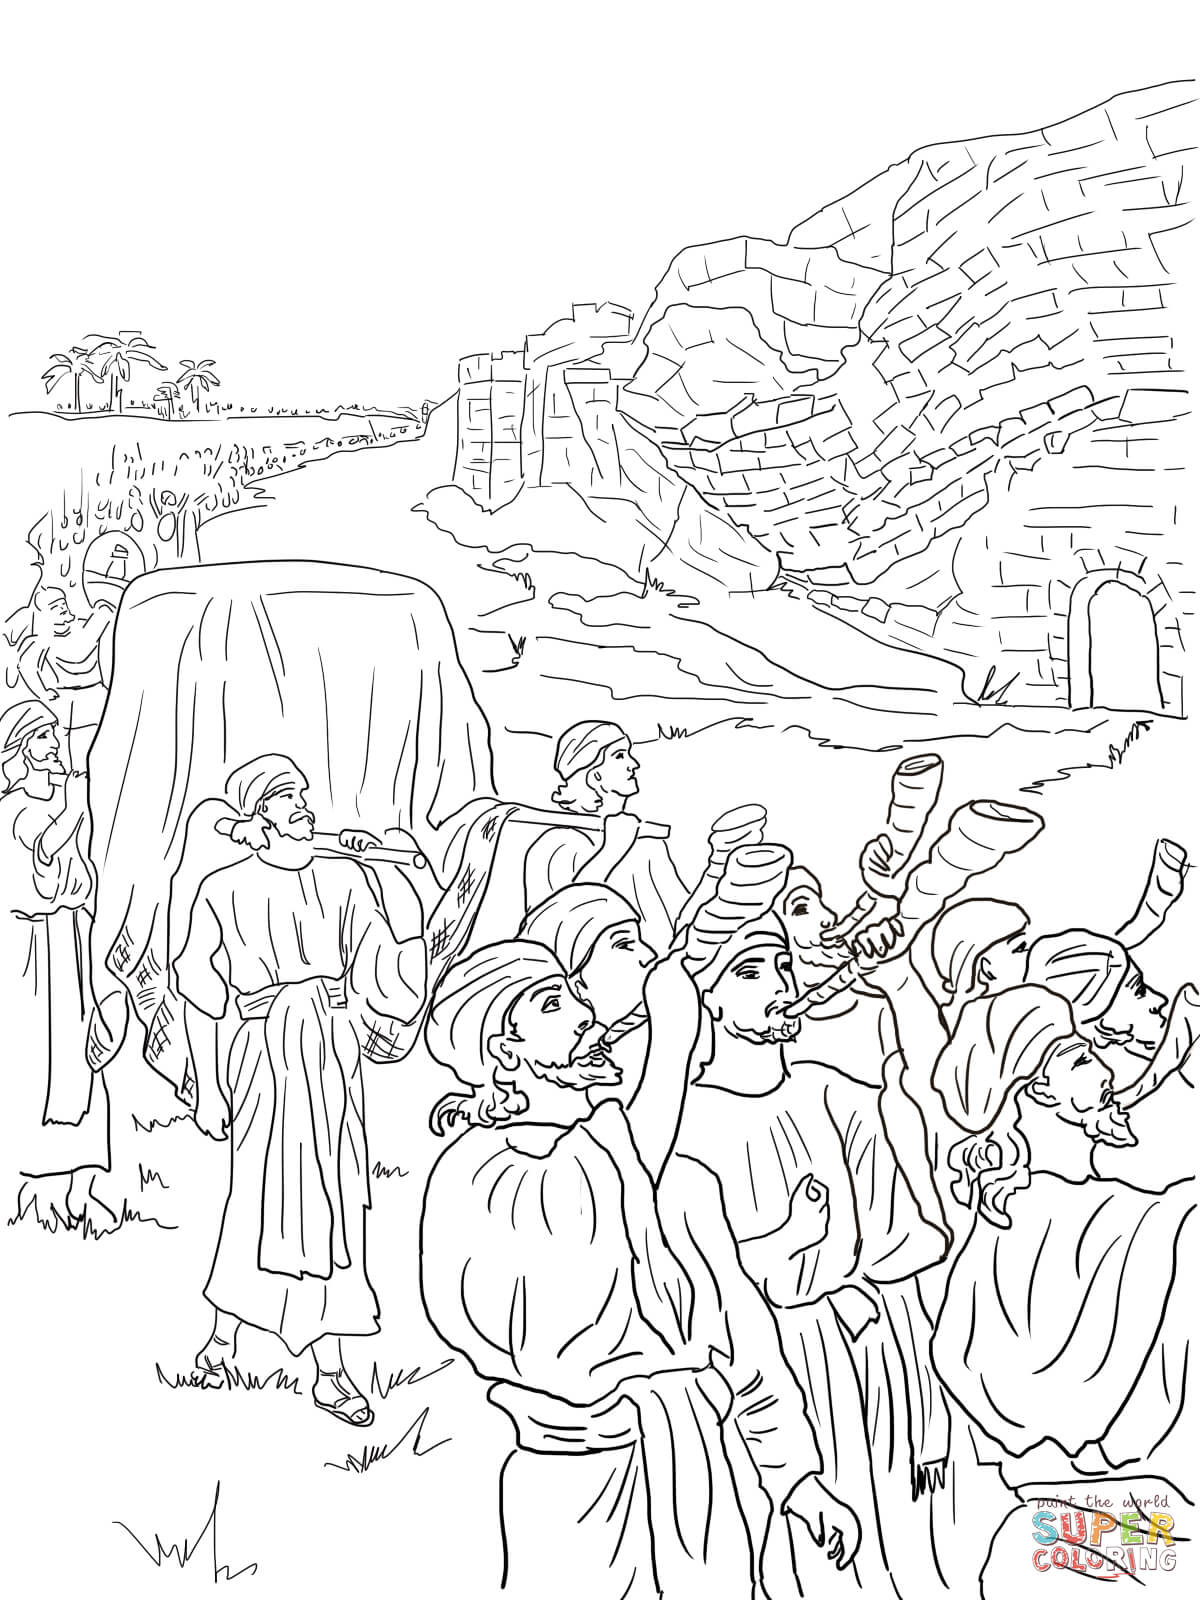 Crossing the jordan river coloring pages